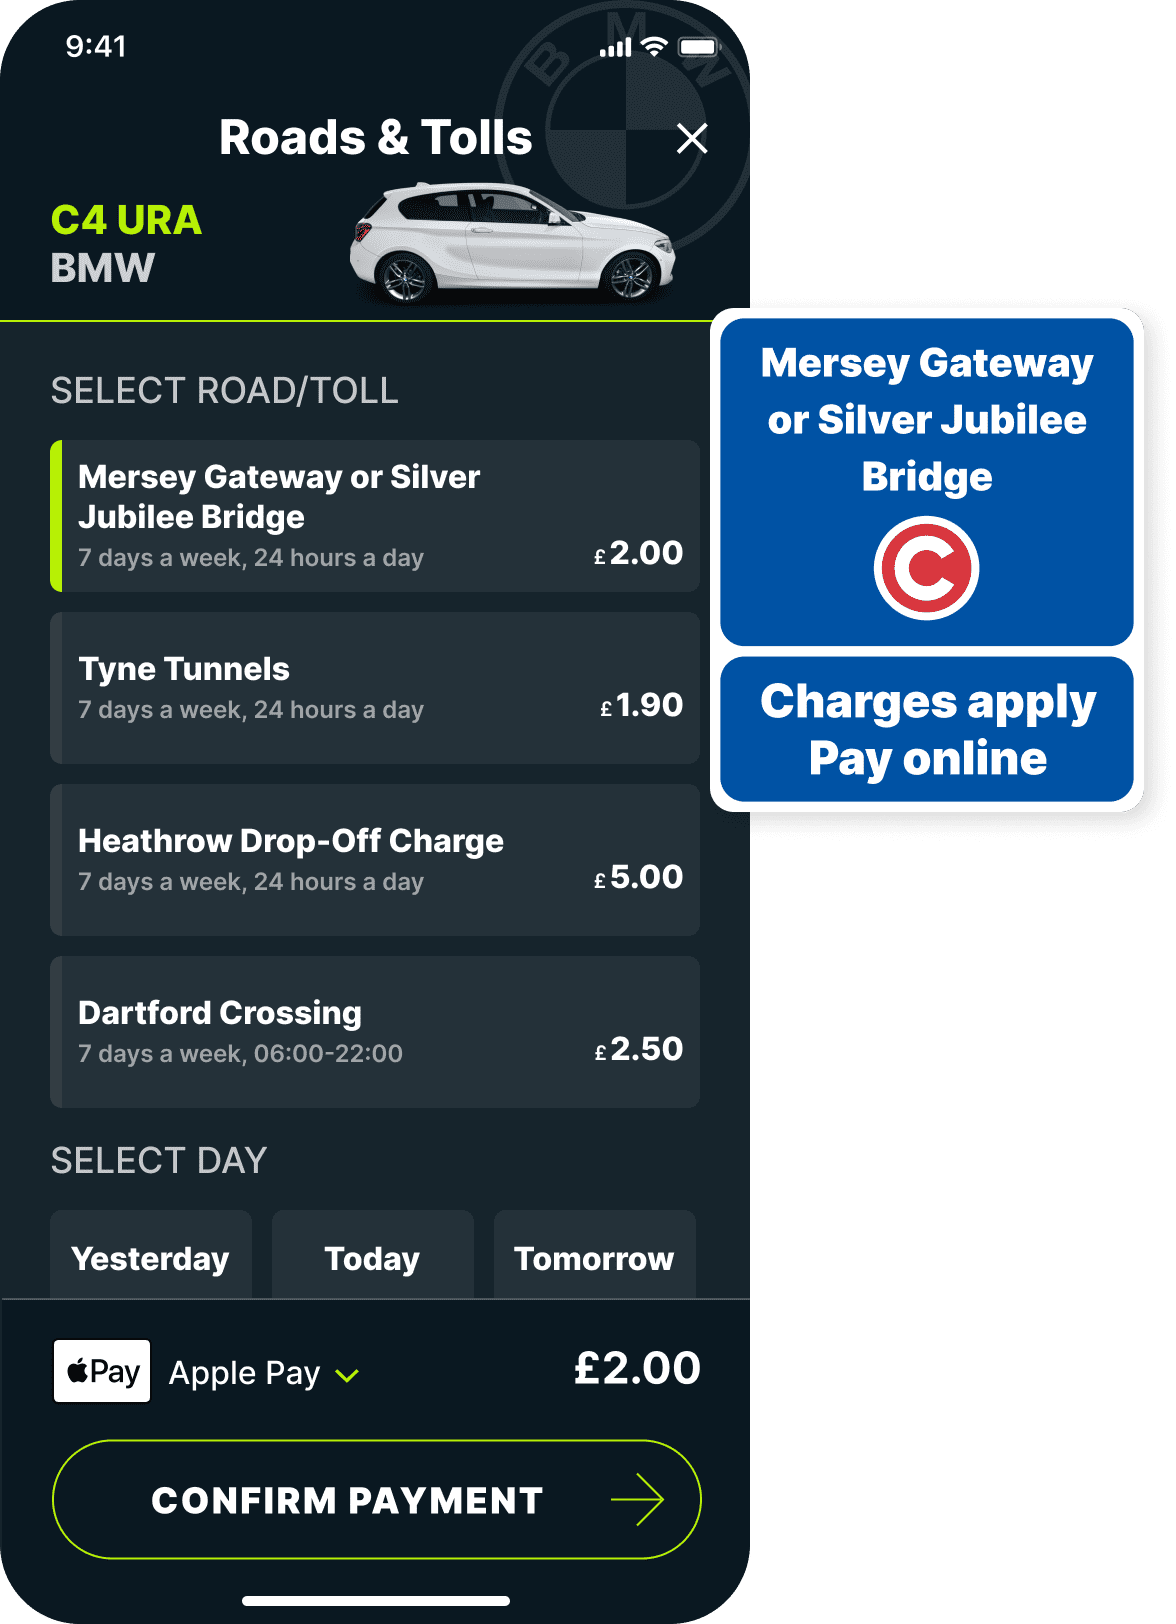 Caura payment screen for Merseyflow charges with the road sign